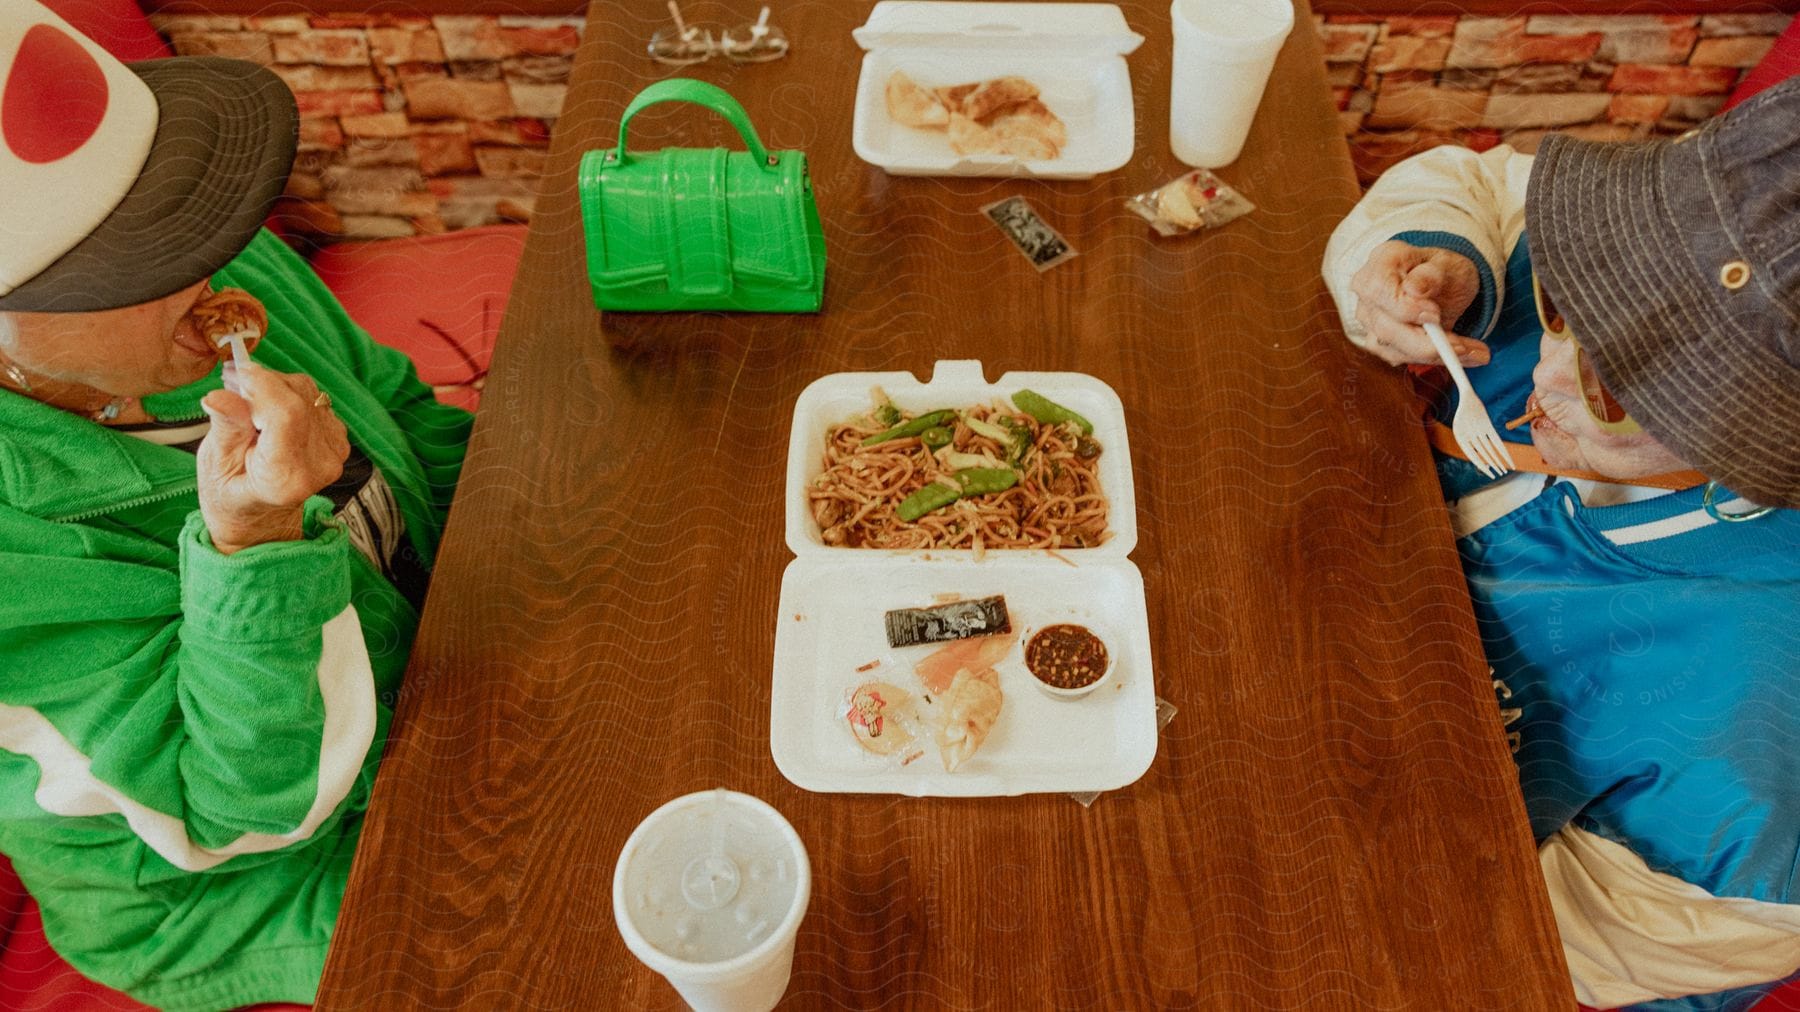 Two women eat chinese food on the table from a plastic bin